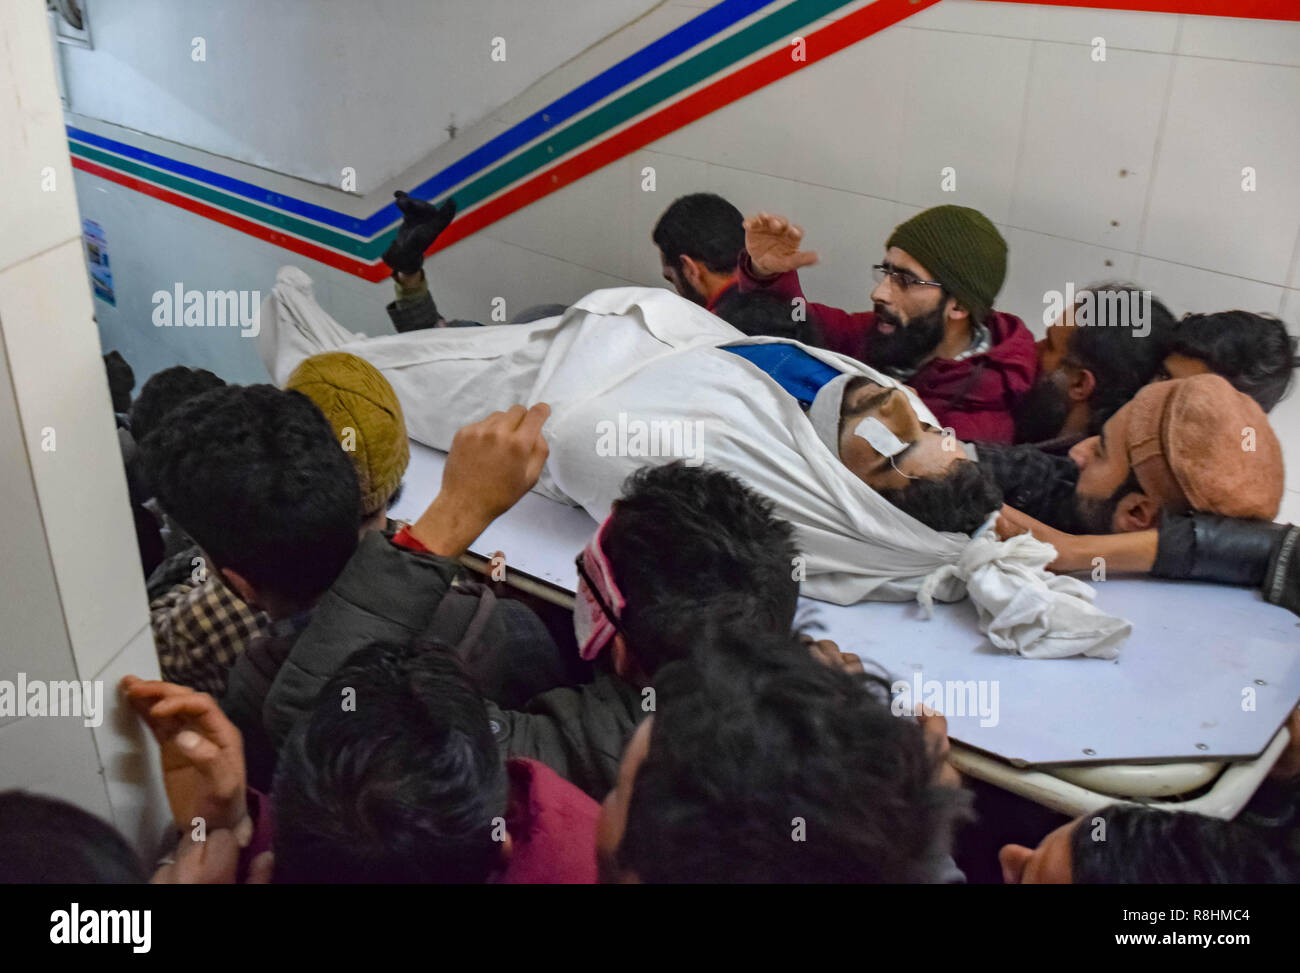 December 15, 2018 - Srinagar, Jammu & Kashmir, India - (EDITORS NOTE: Image depicts death).People seen carrying a dead body of a civilian man after he was declared dead at a hospital in Srinagar.Seven civilians, three armed rebels and an army man were killed during a gun battle between armed rebels and Indian forces at Pulwama in Indian-administered Kashmir. Credit: Idrees Abbas/SOPA Images/ZUMA Wire/Alamy Live News Stock Photo